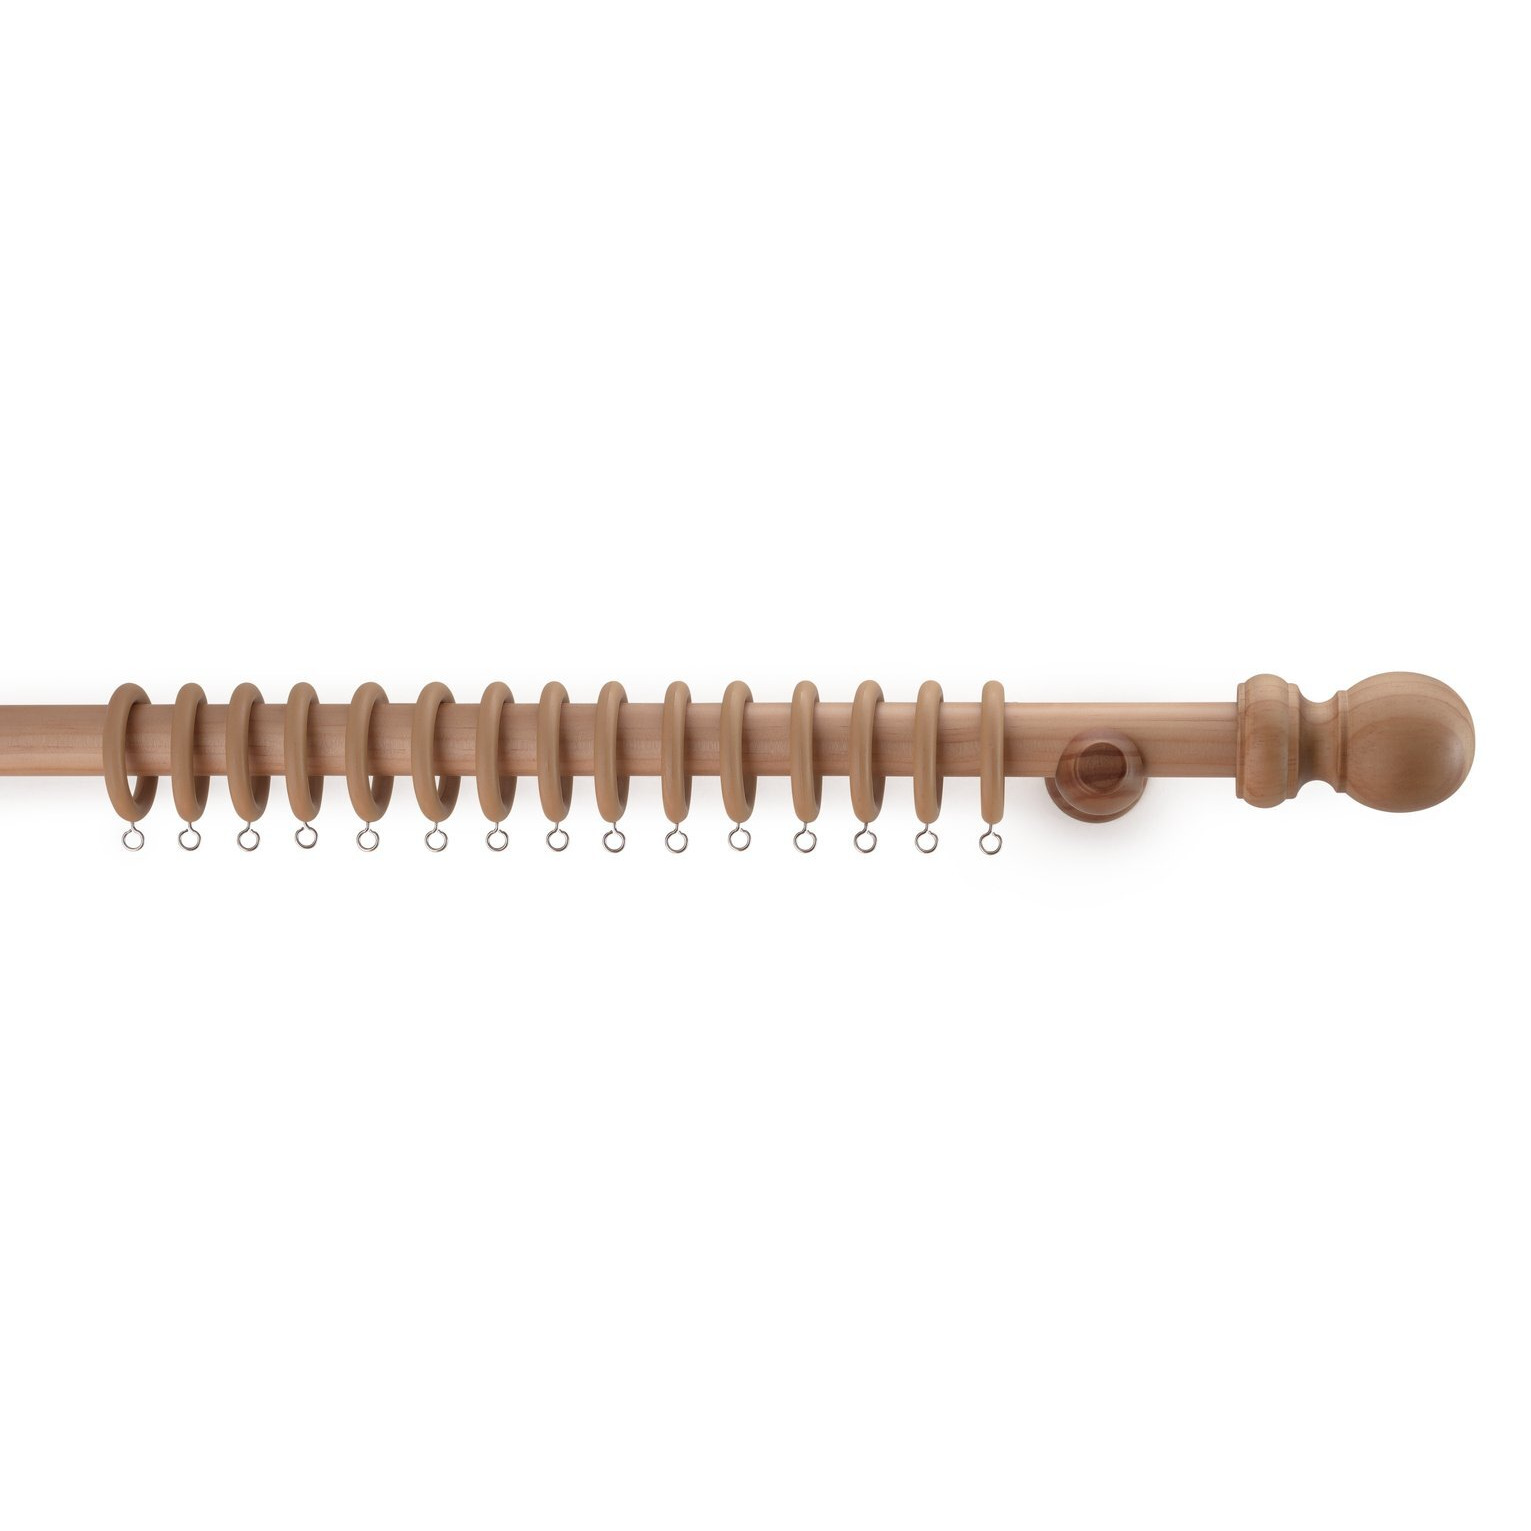 Argos Home 2.4m Wooden Curtain Pole - Natural - image 1